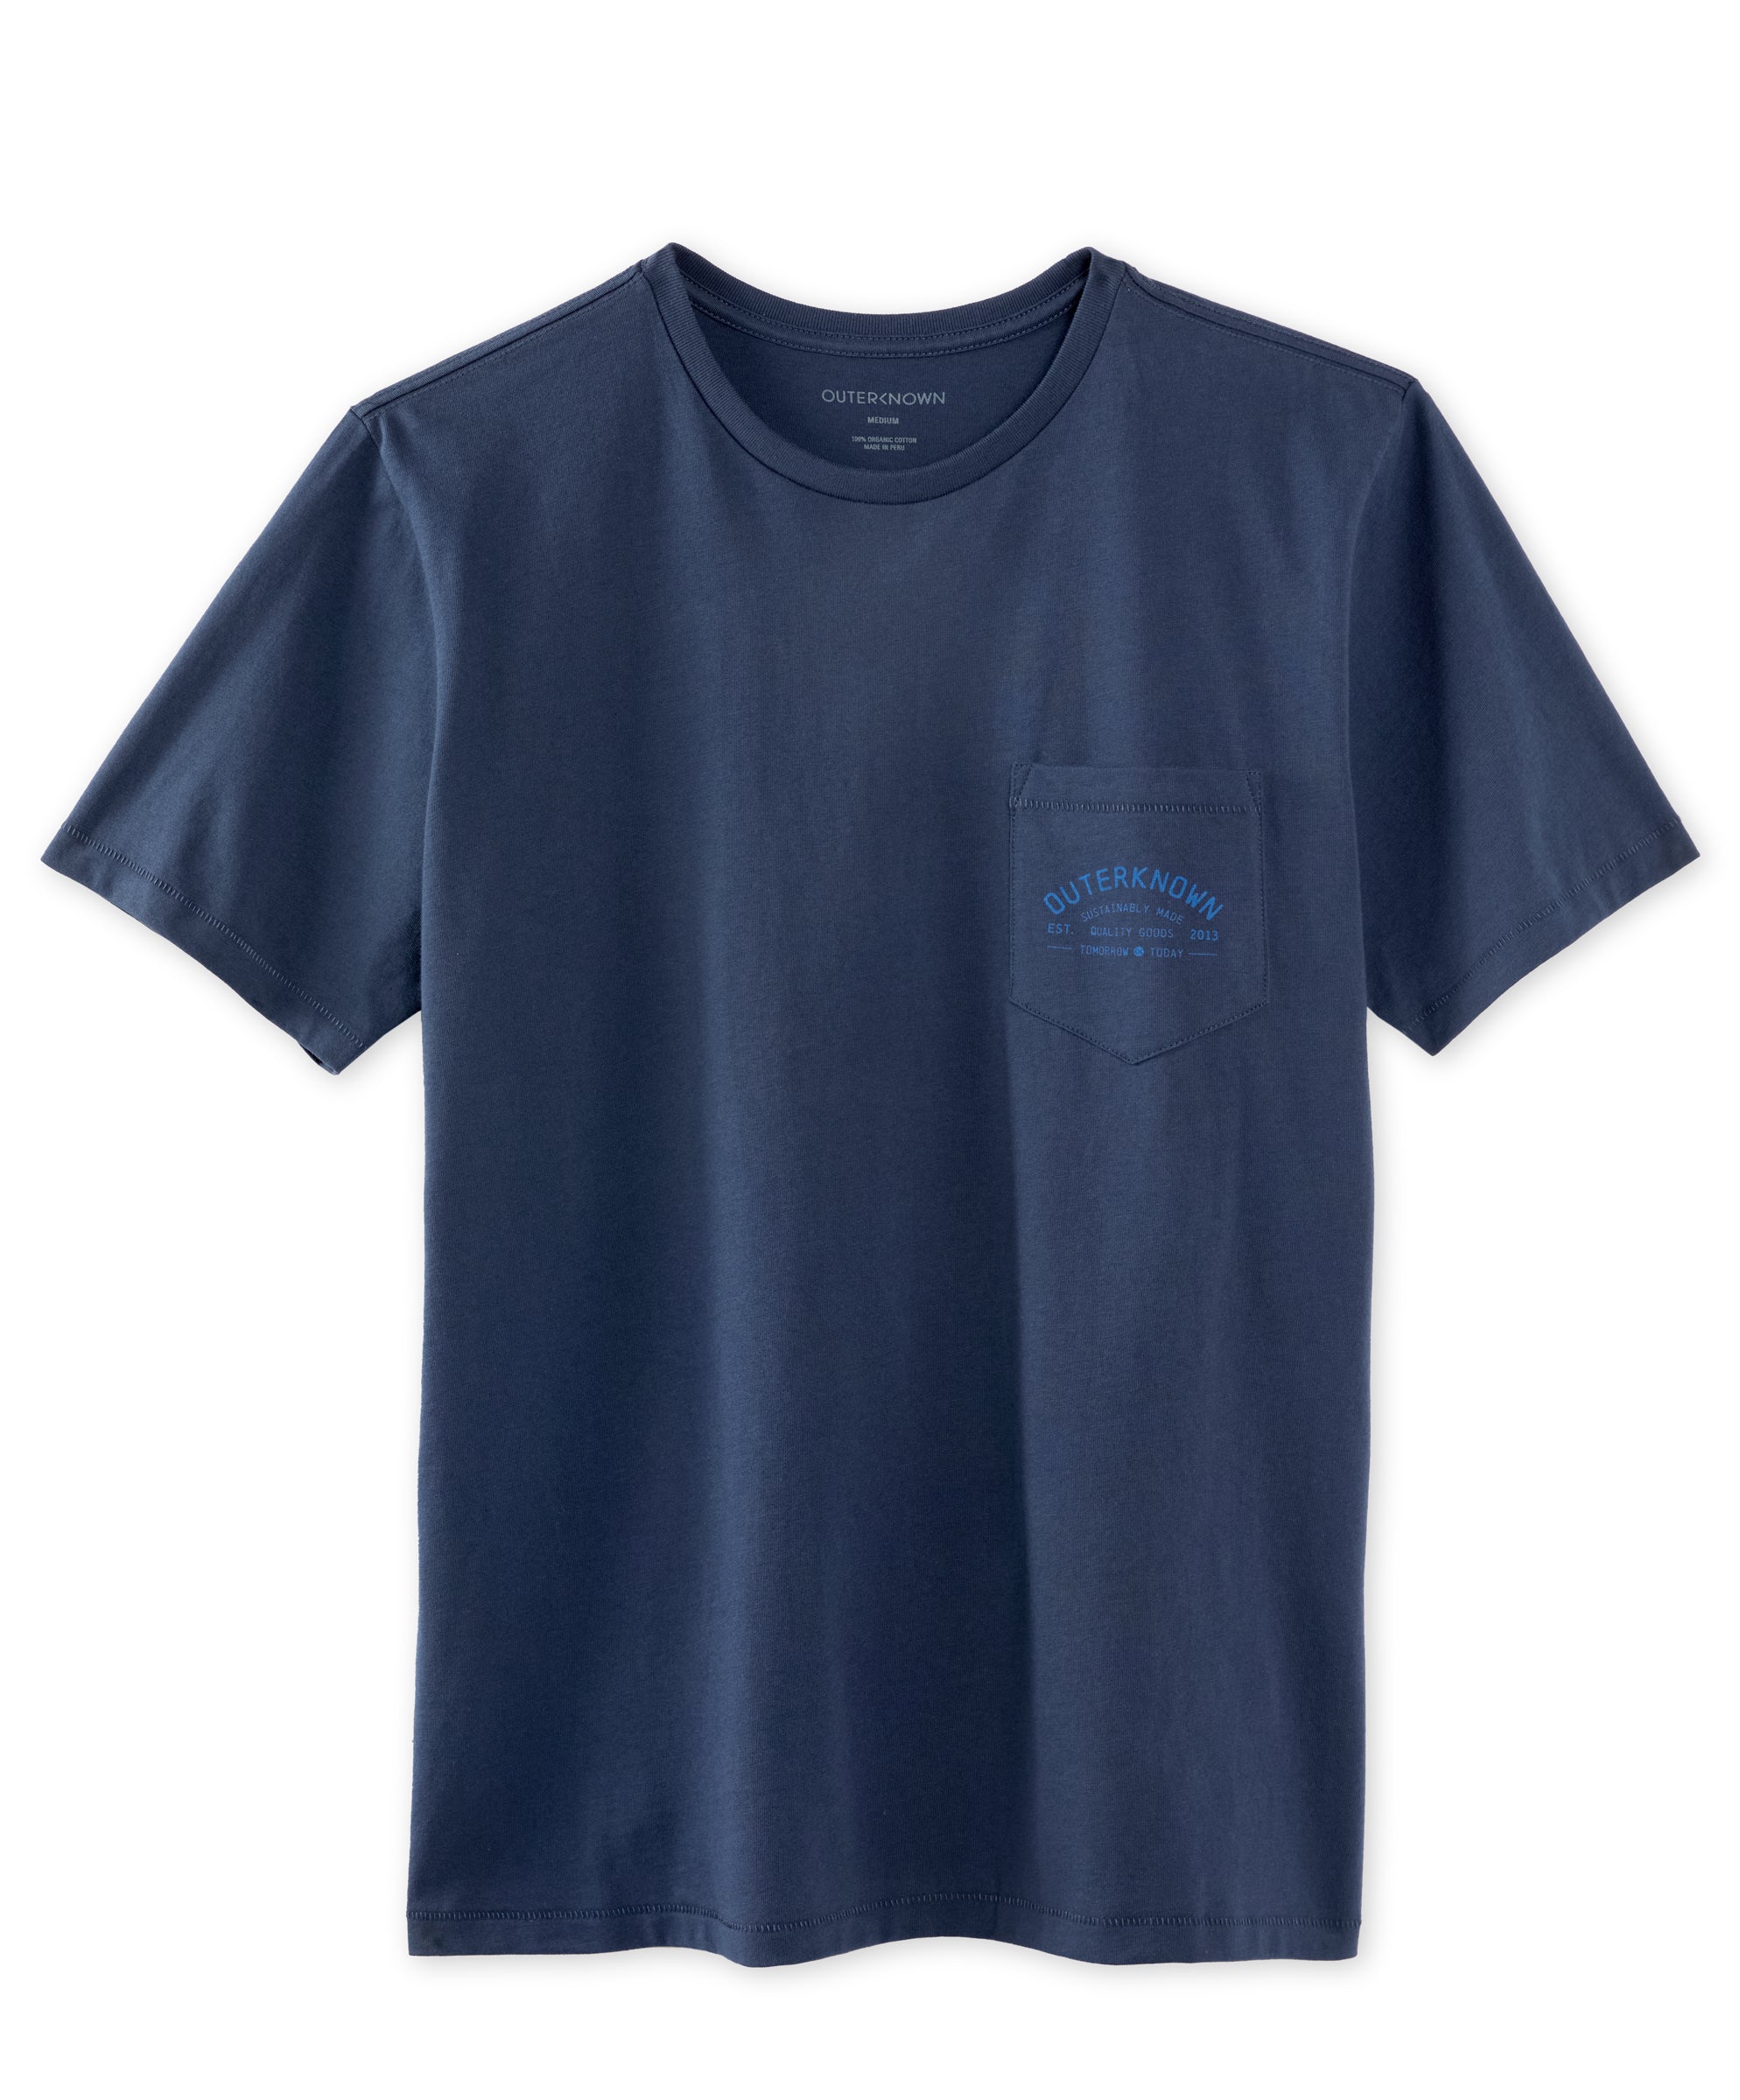 Industrial Outerknown S/S Tee | Men's Tees | Outerknown